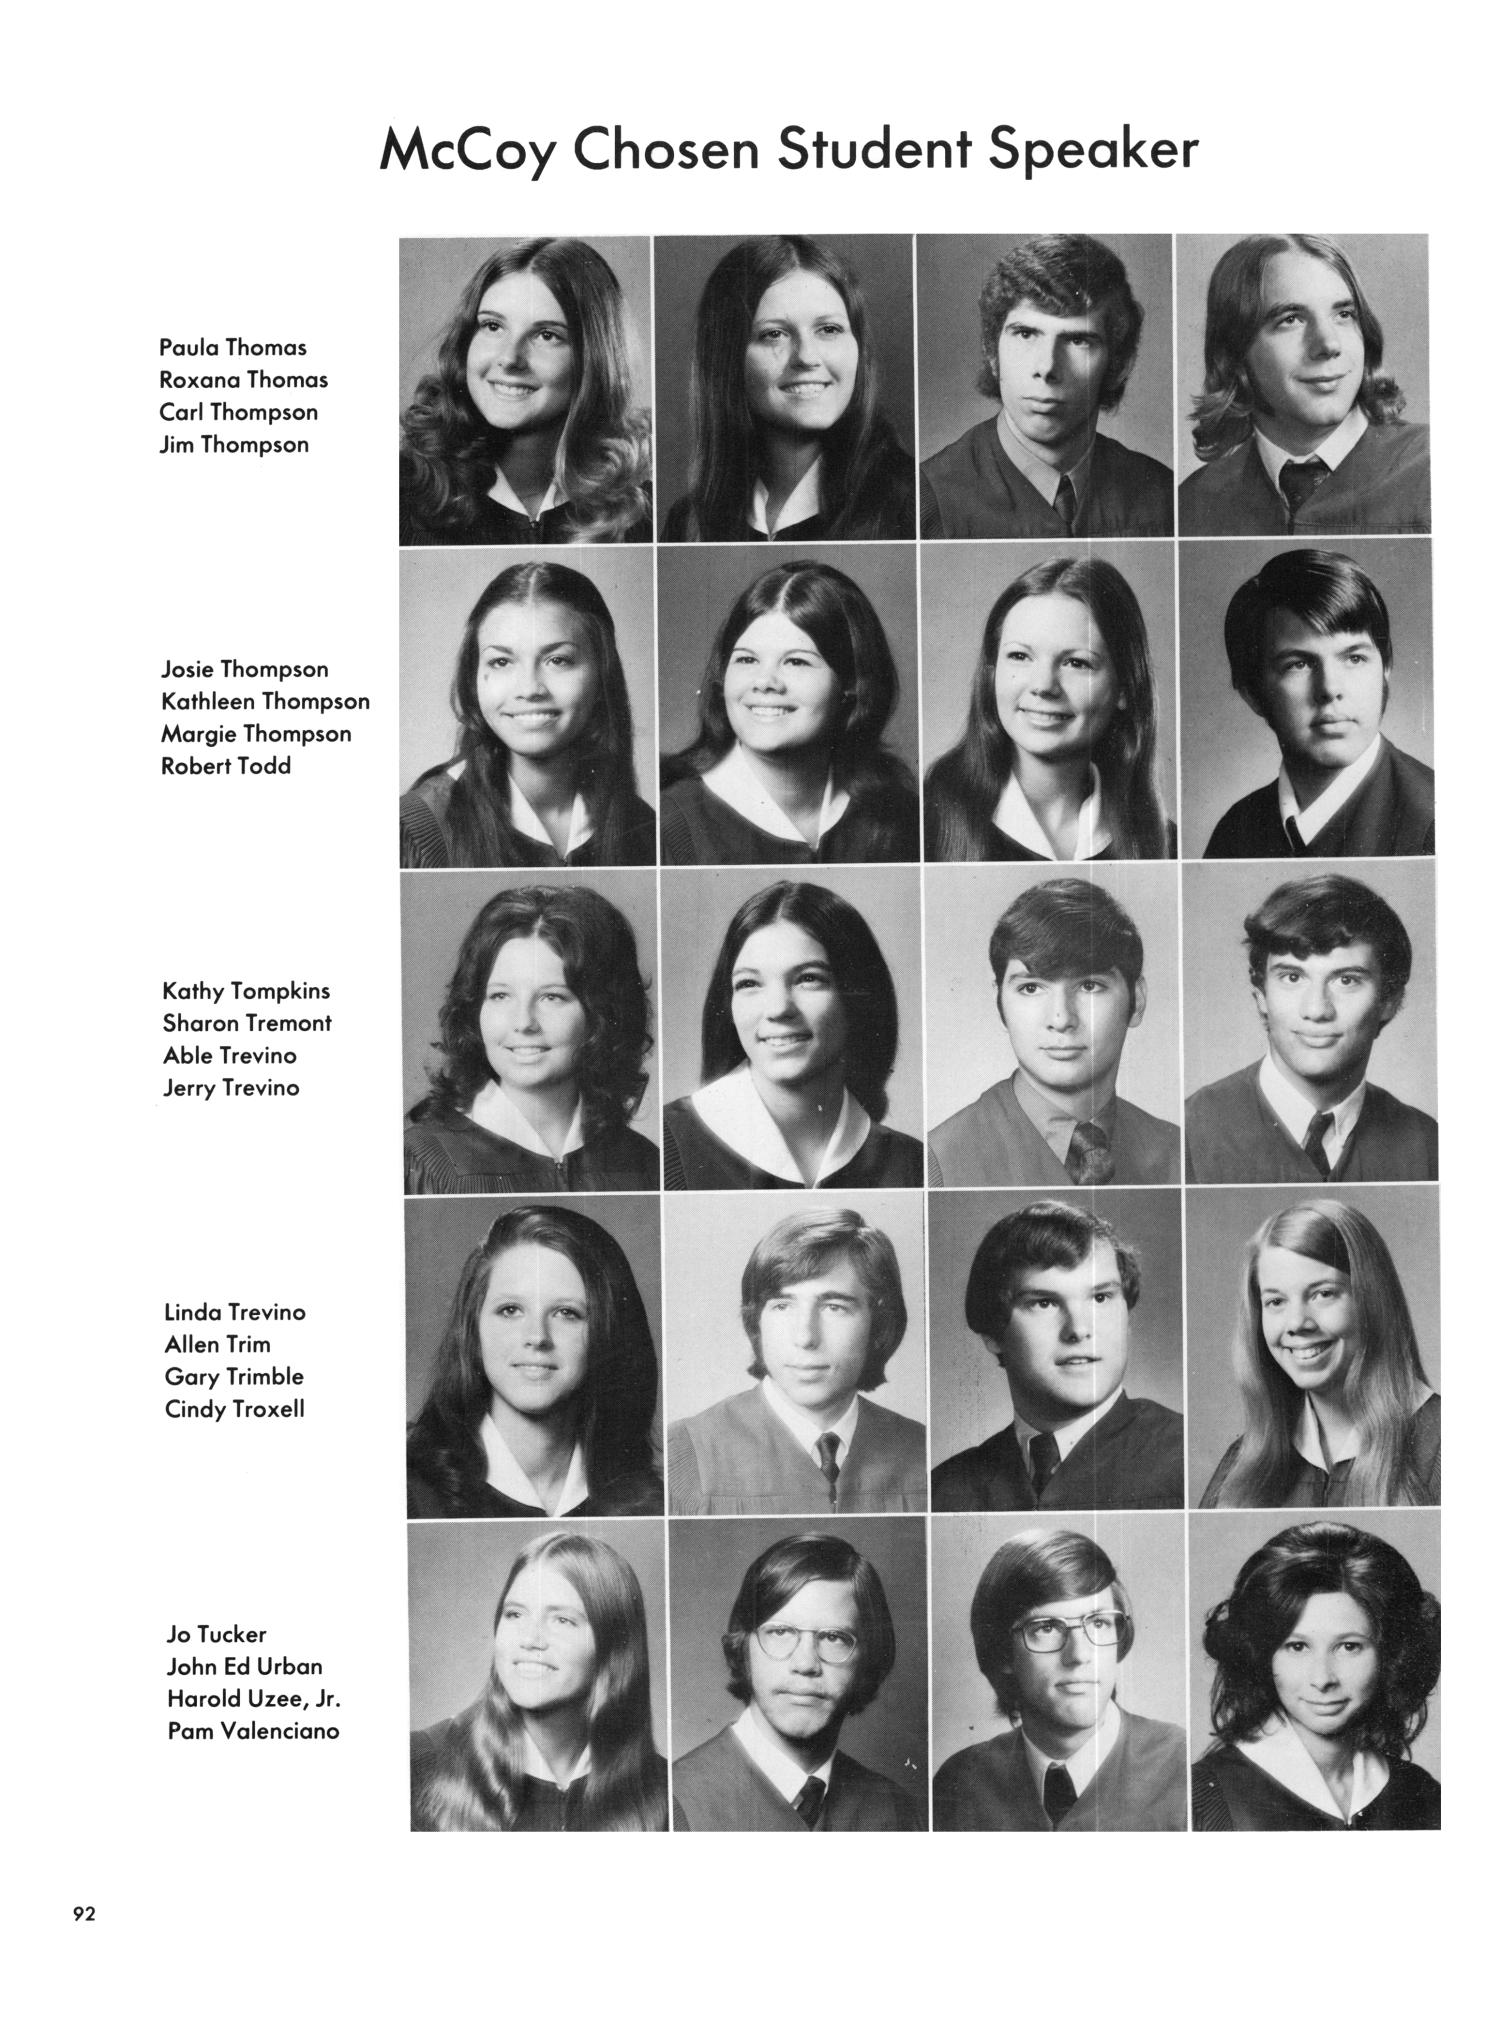 The Yellow Jacket, Yearbook of Thomas Jefferson High School, 1973
                                                
                                                    92
                                                